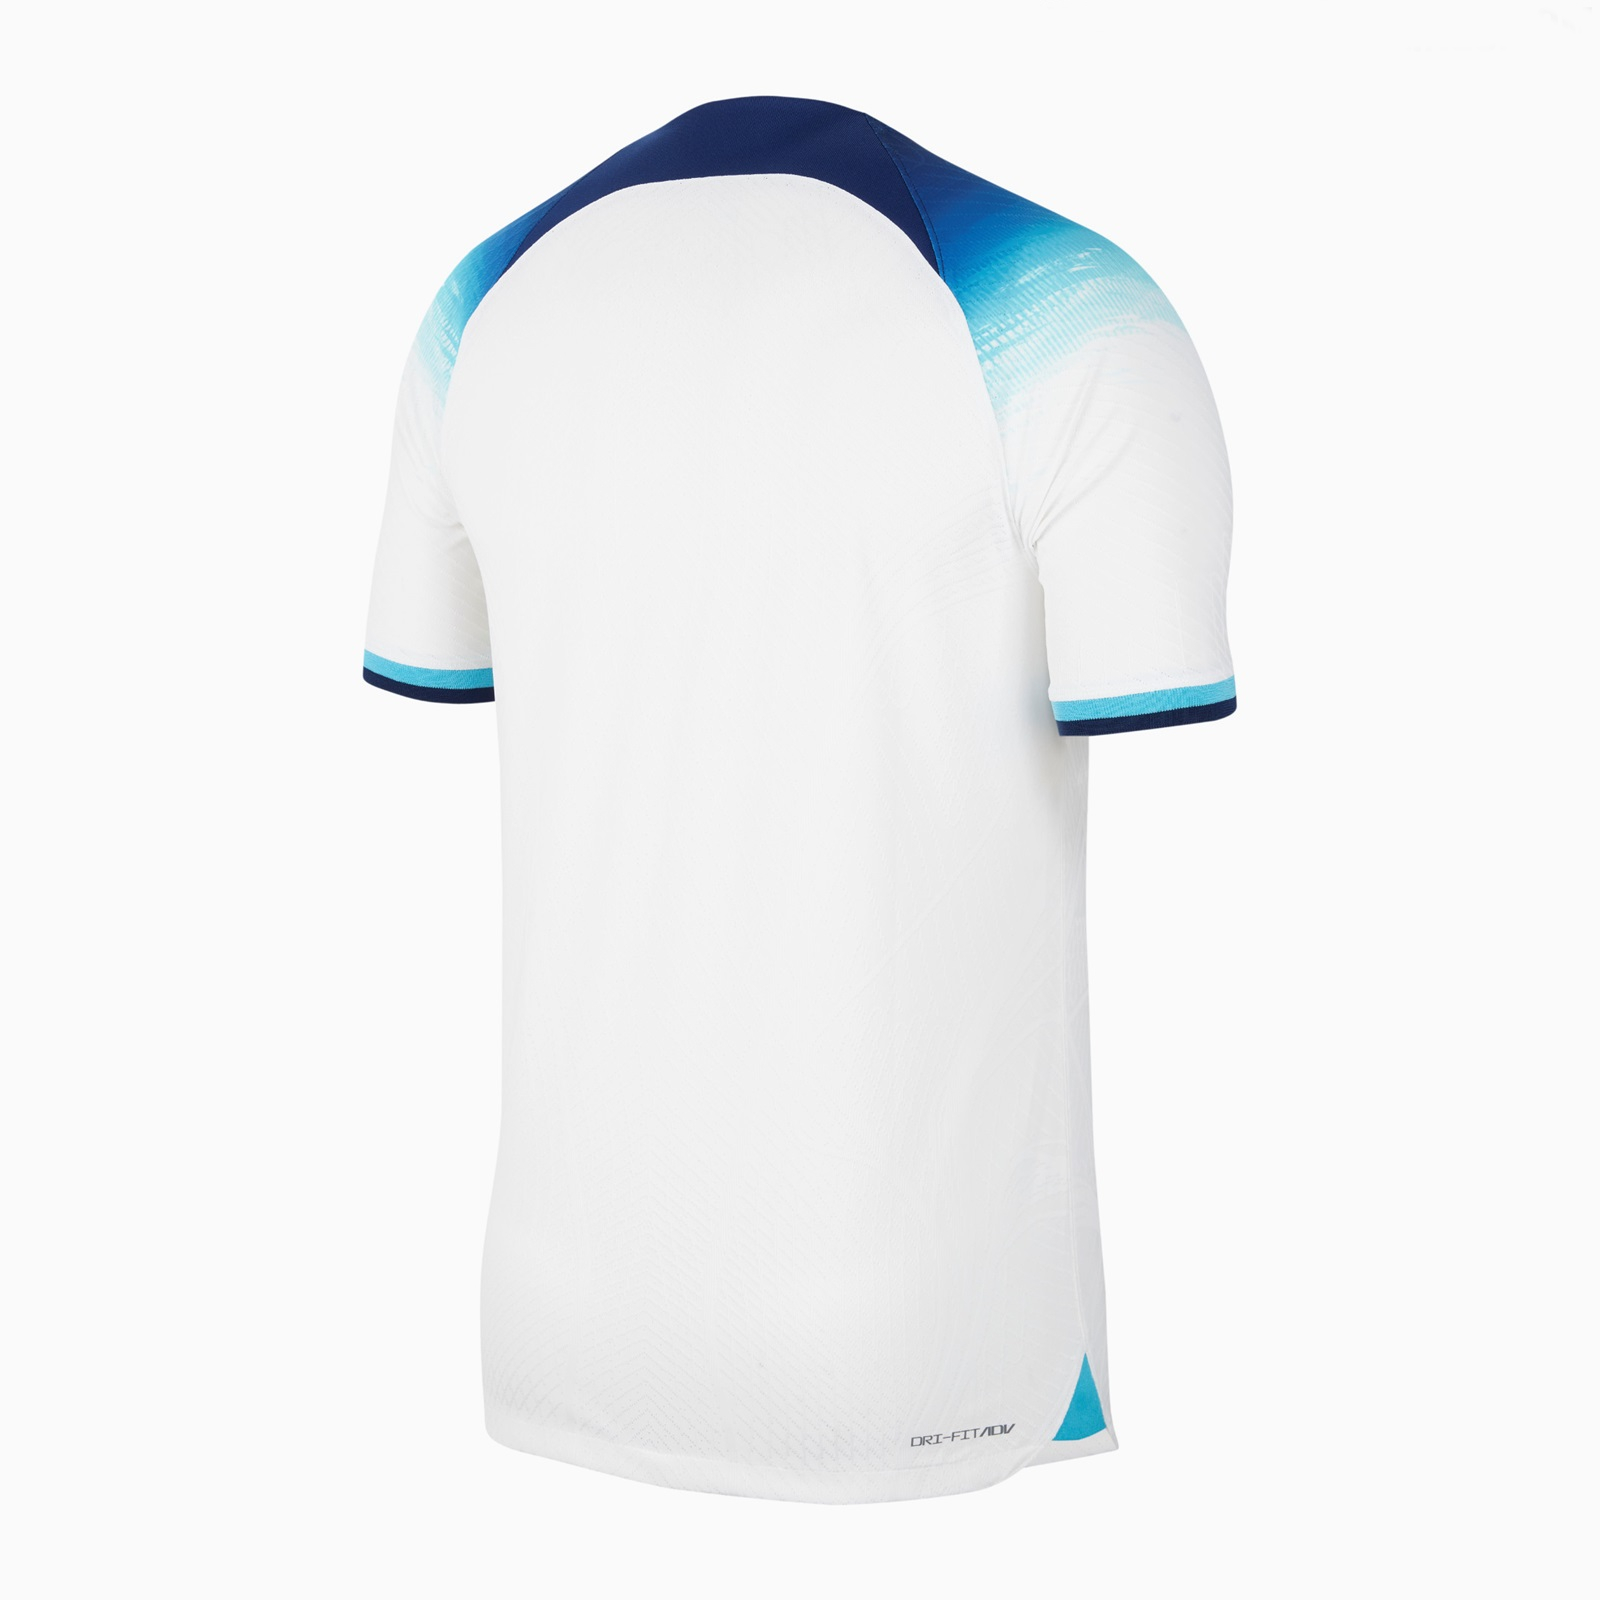 England FIFA World Cup Jersey 2022 in Pakistan - The Shoppies